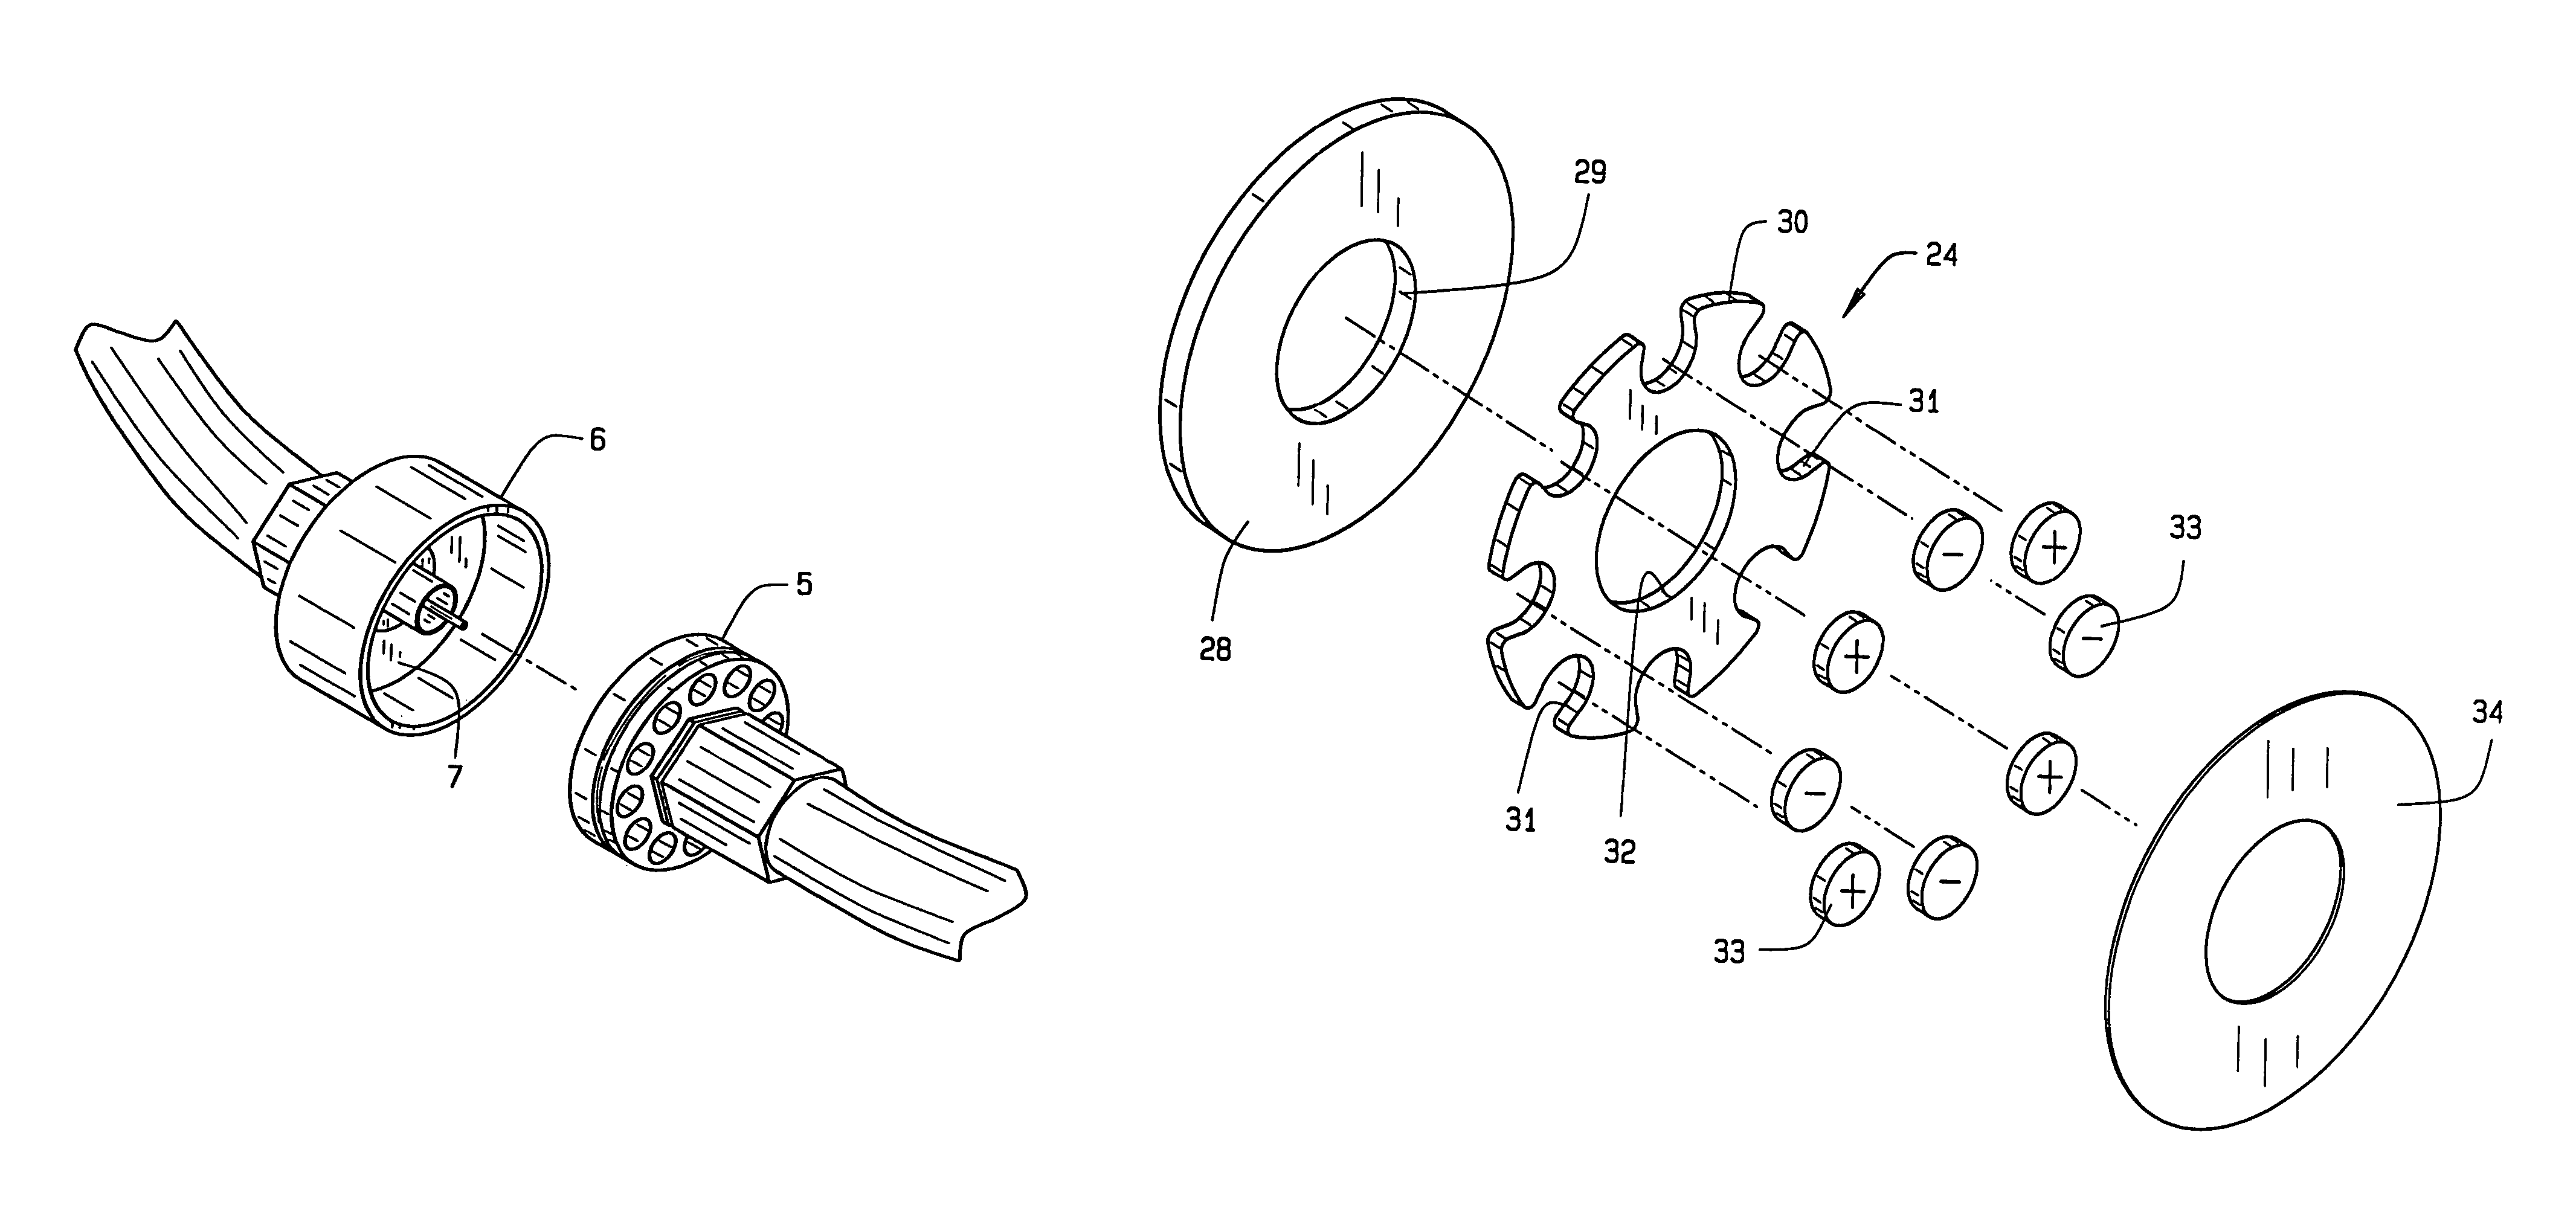 Fuel line breakaway connector secured by plurality of individually spaced magnets